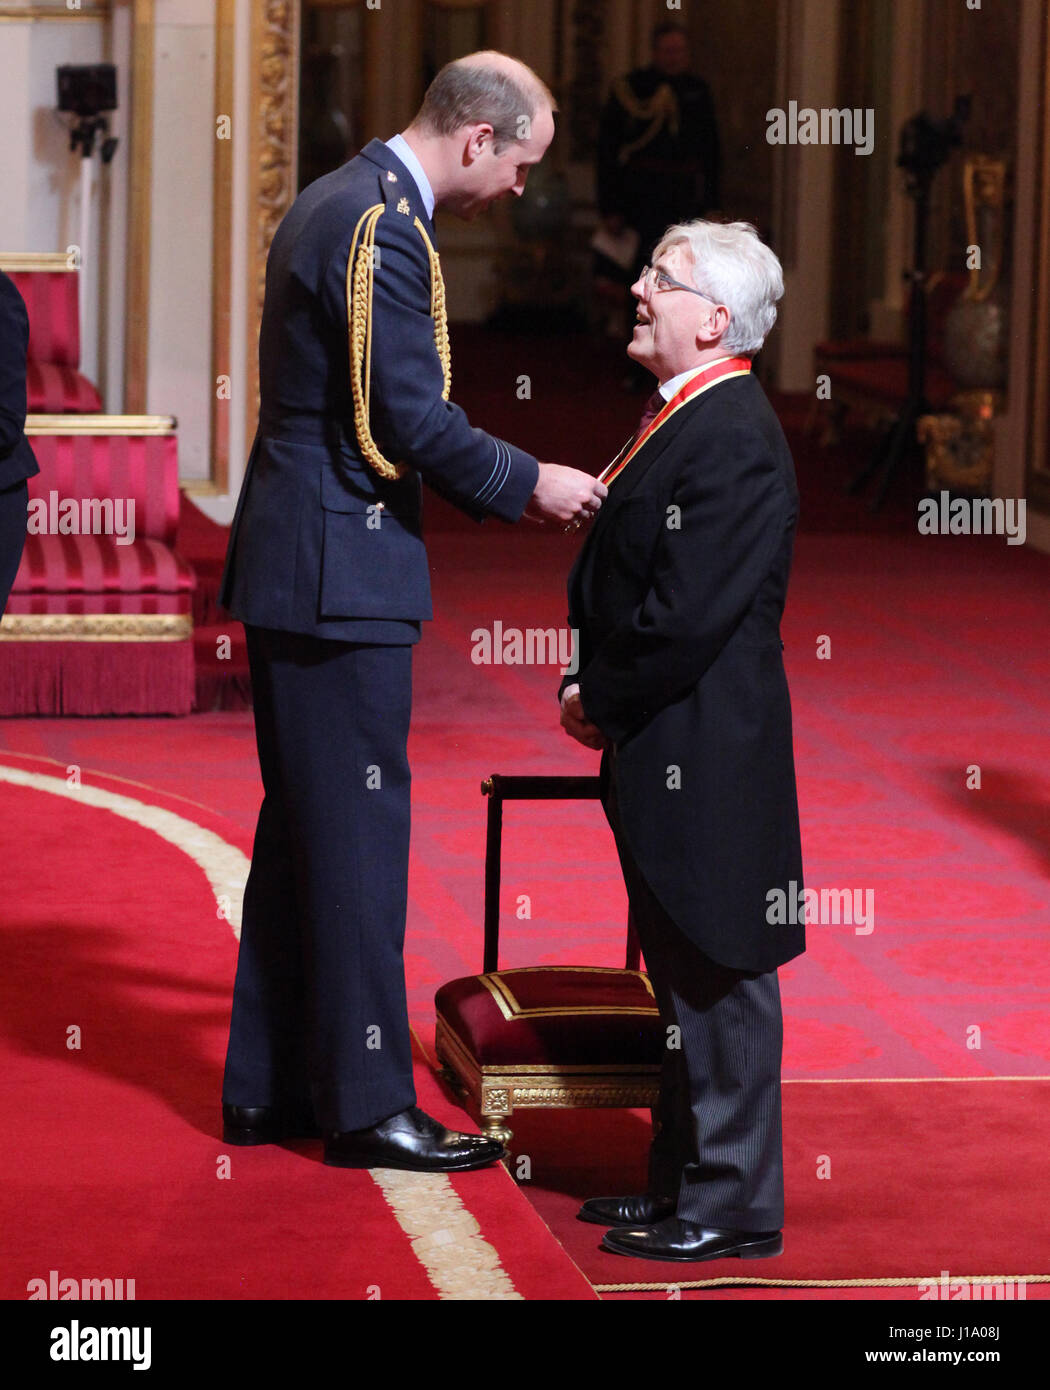 Sir David Sloman from London is made a Knight Bachelor of the British Empire by the Duke of Cambridge at Buckingham Palace. Stock Photo